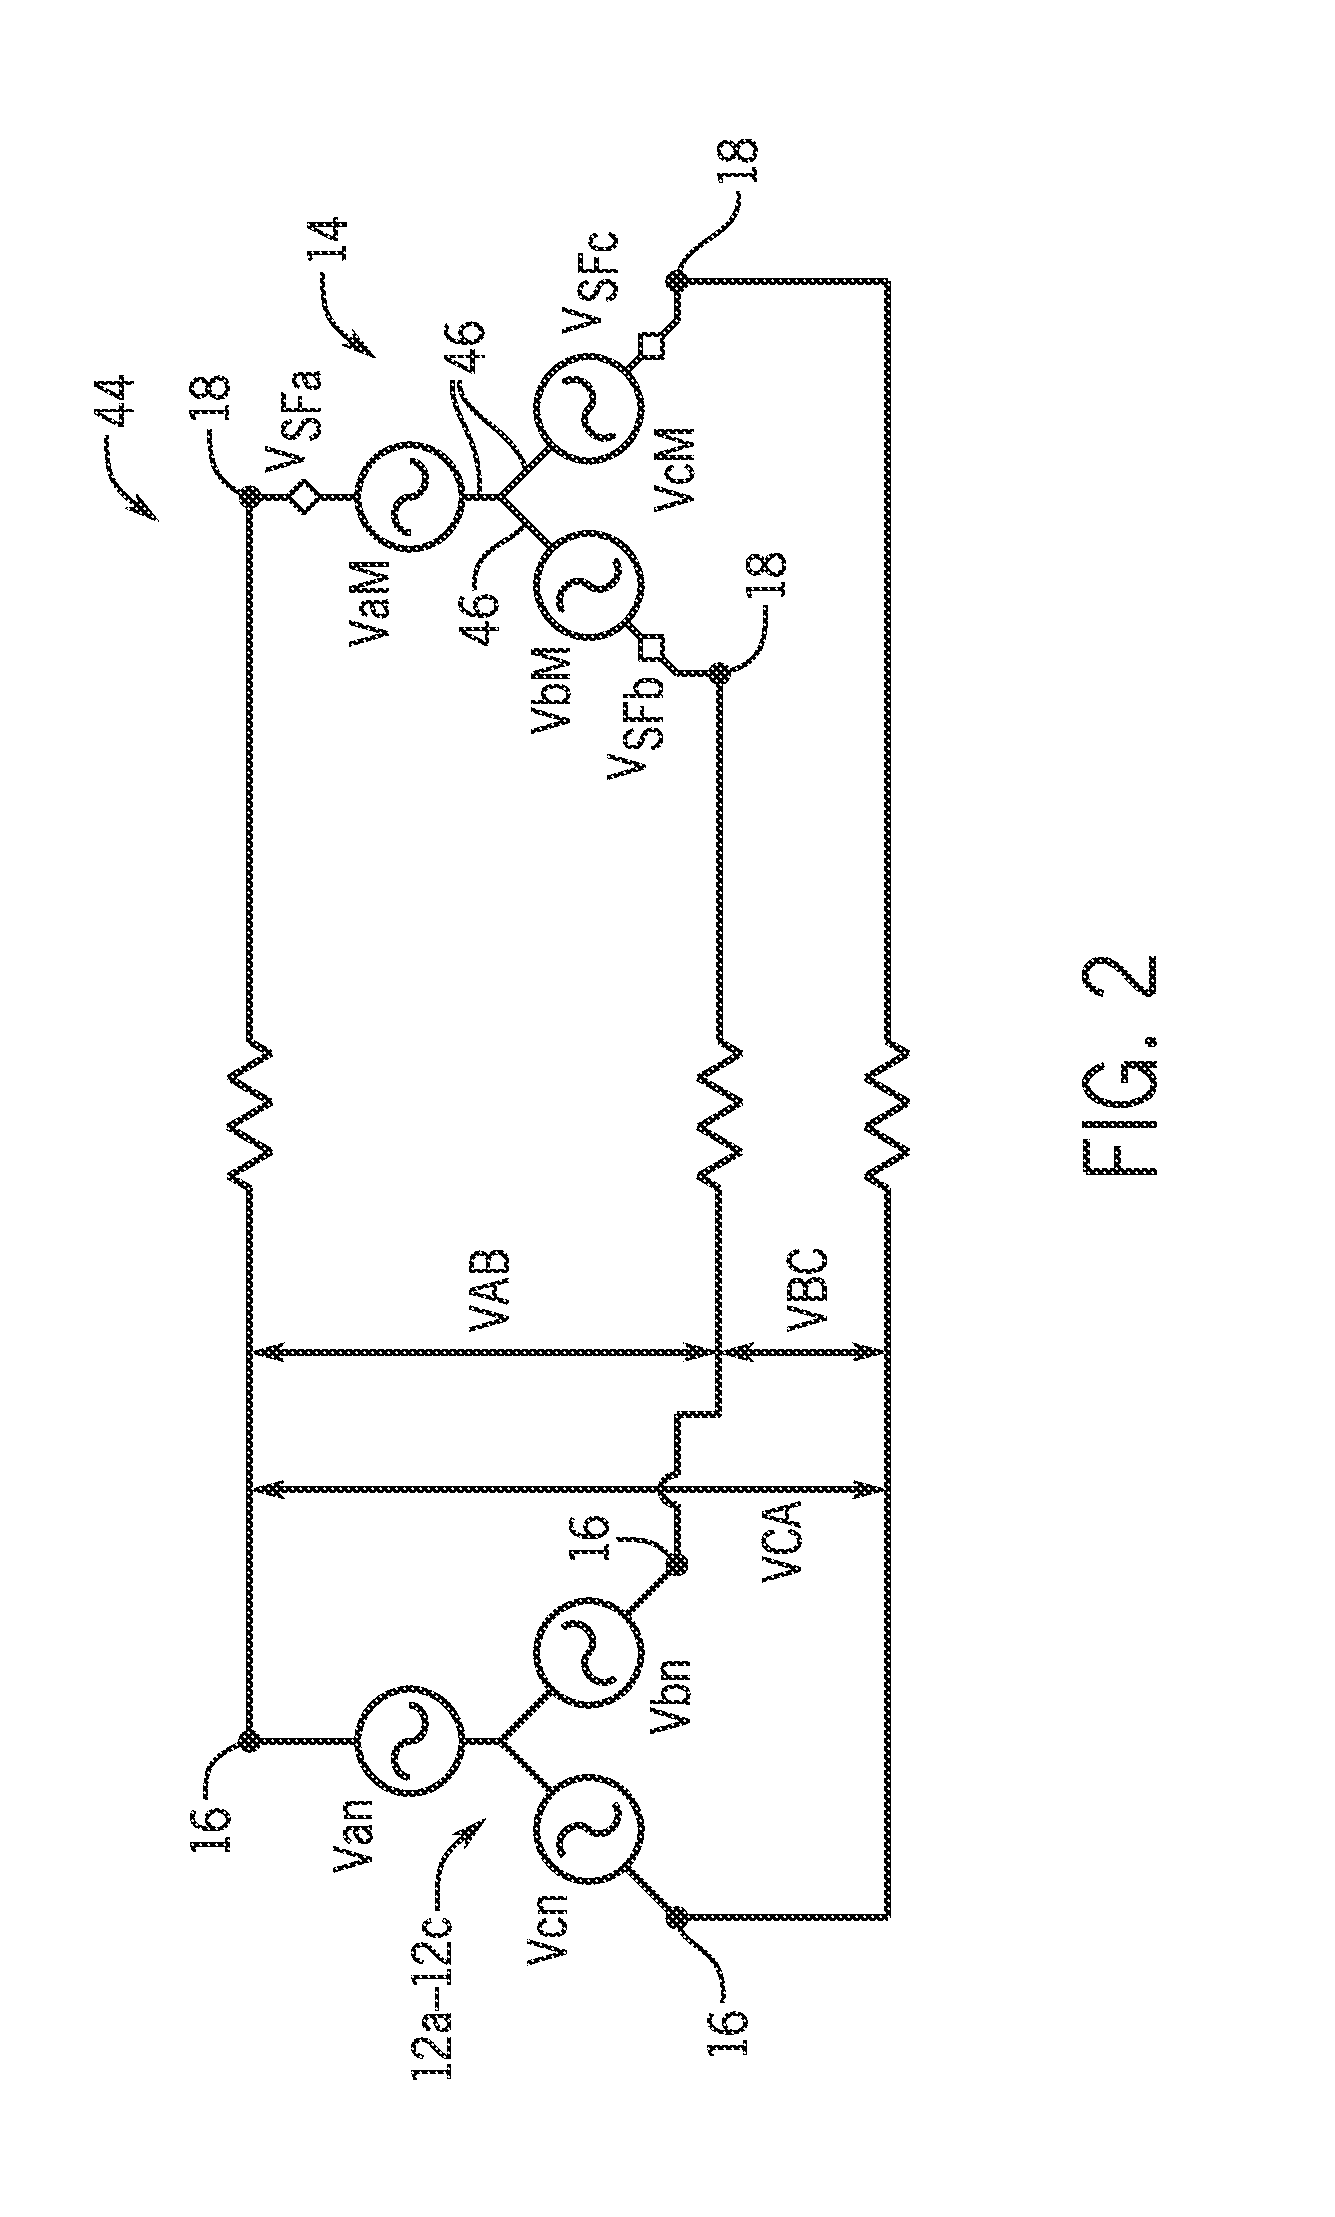 System and method for detecting, localizing, and quantifying stator winding faults in ac motors